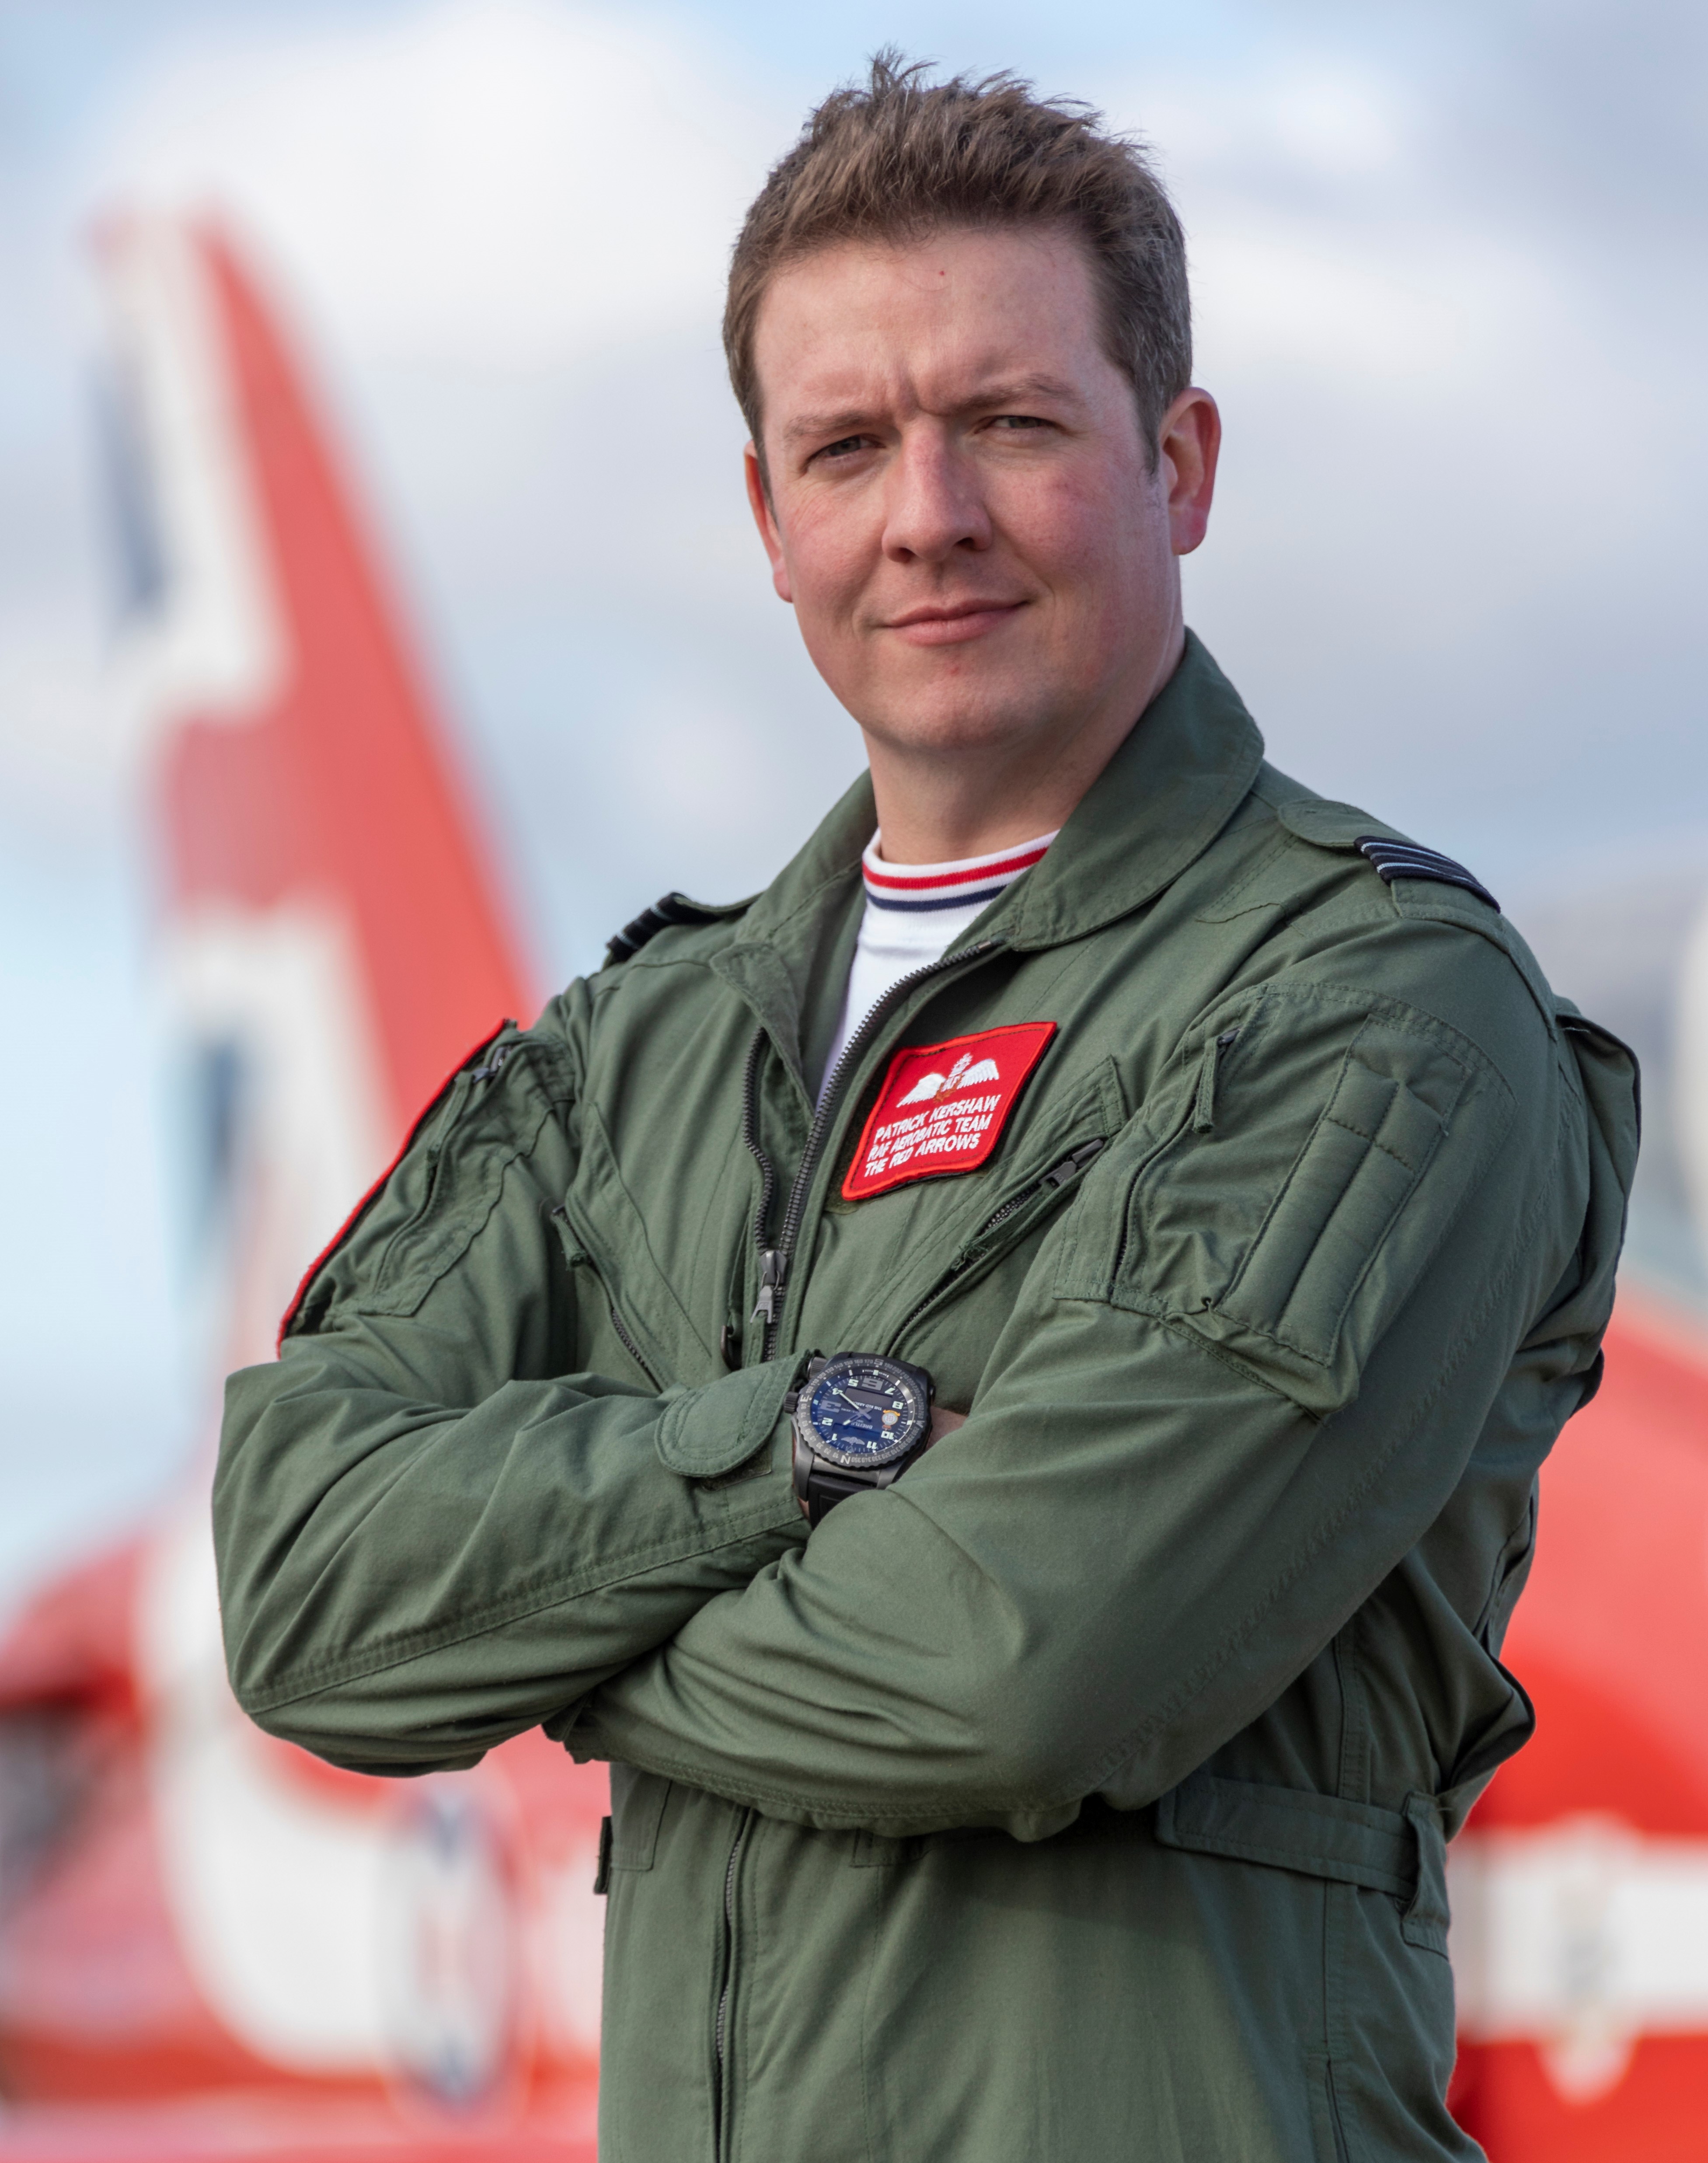 Red 3 for 2022 will be Flt Lt Patrick Kershaw.